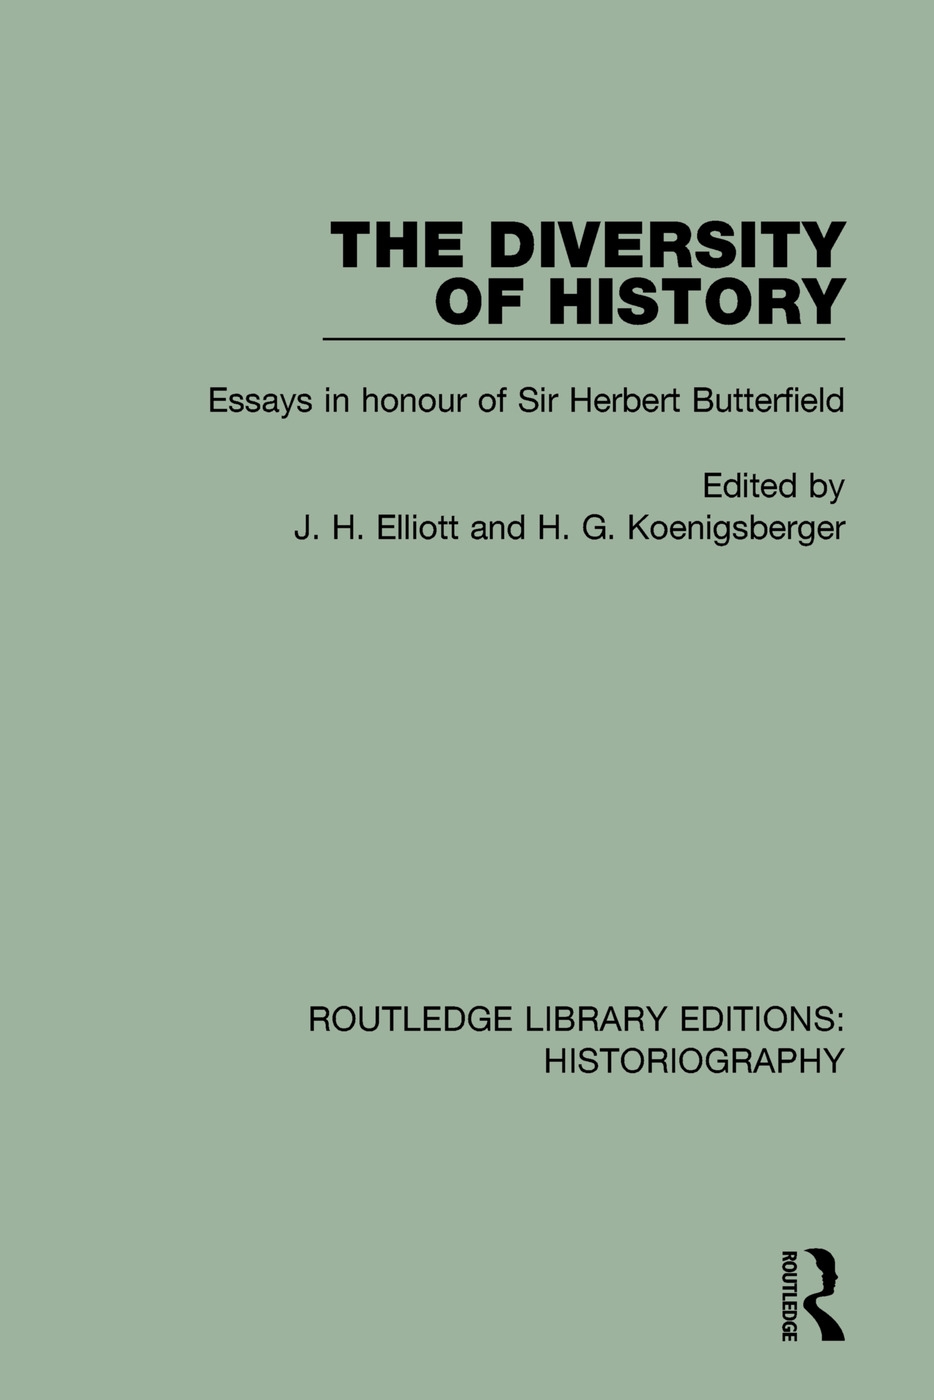 The Diversity of History: Essays in Honour of Sir Herbert Butterfield